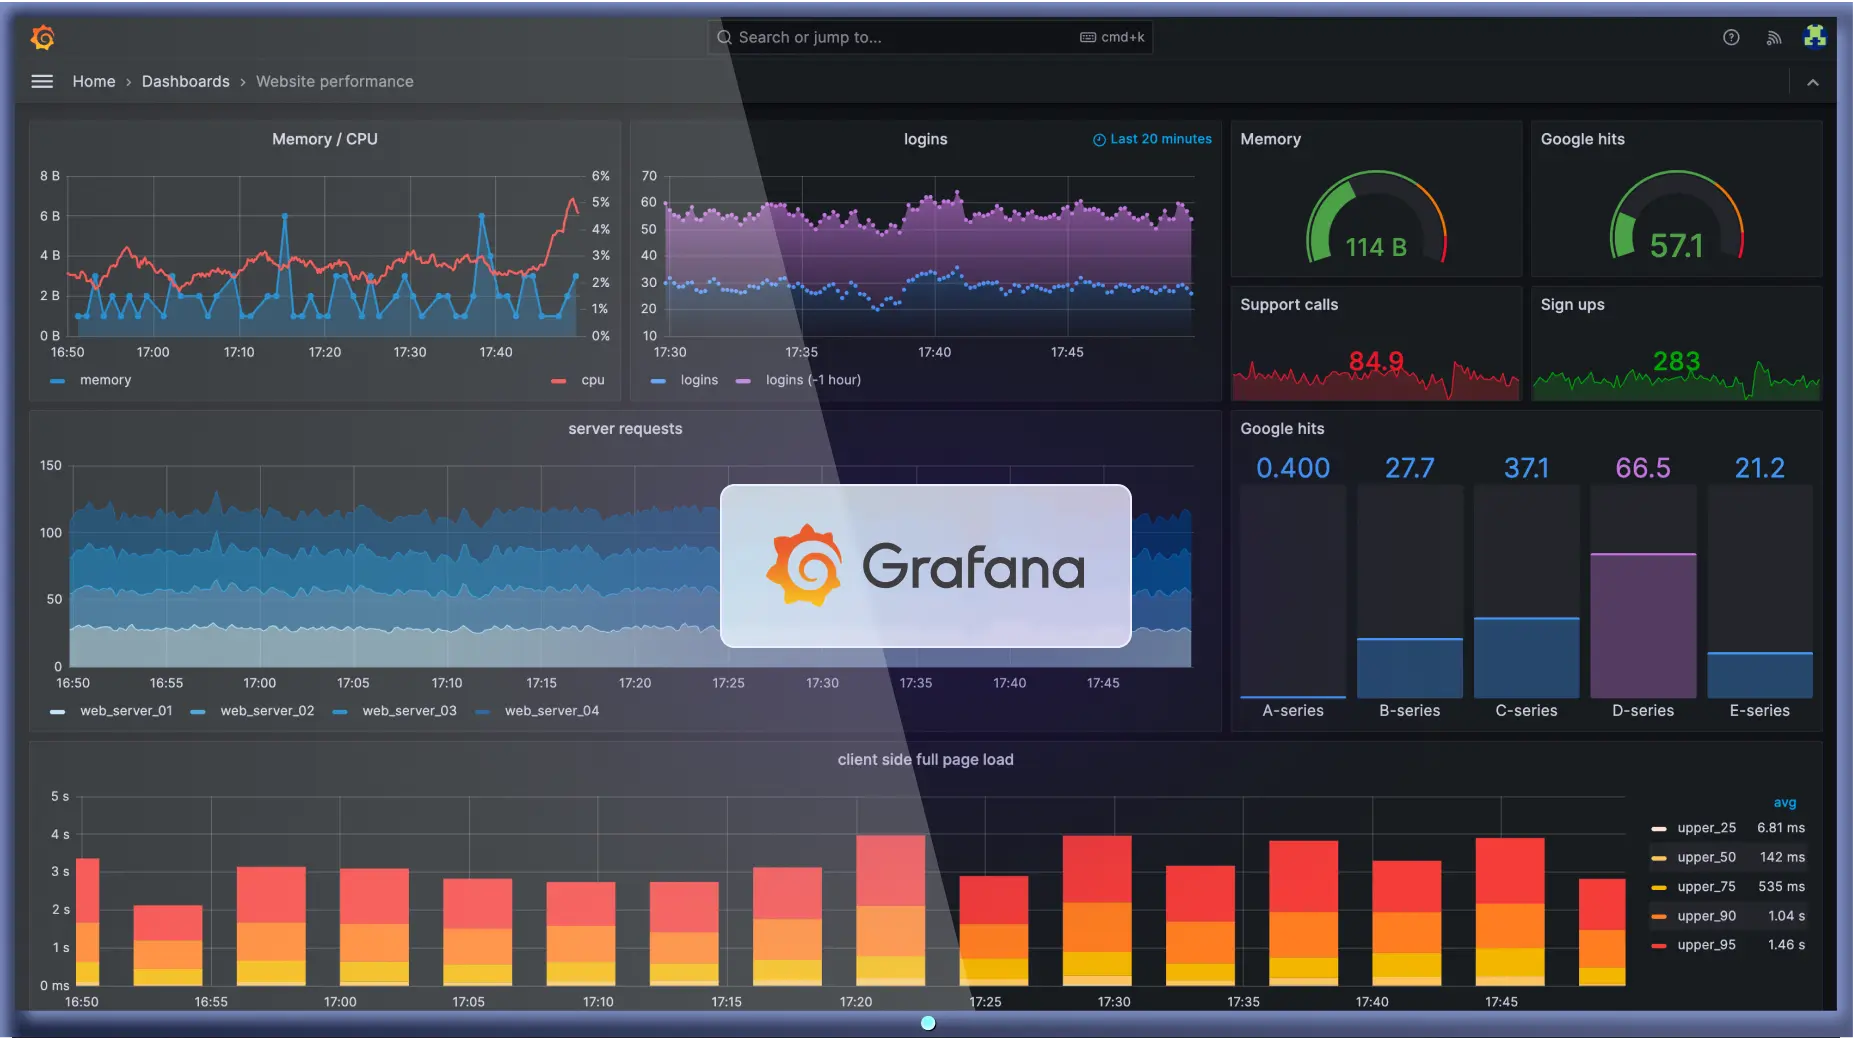 A Grafana dashboard is showing on a TV screen